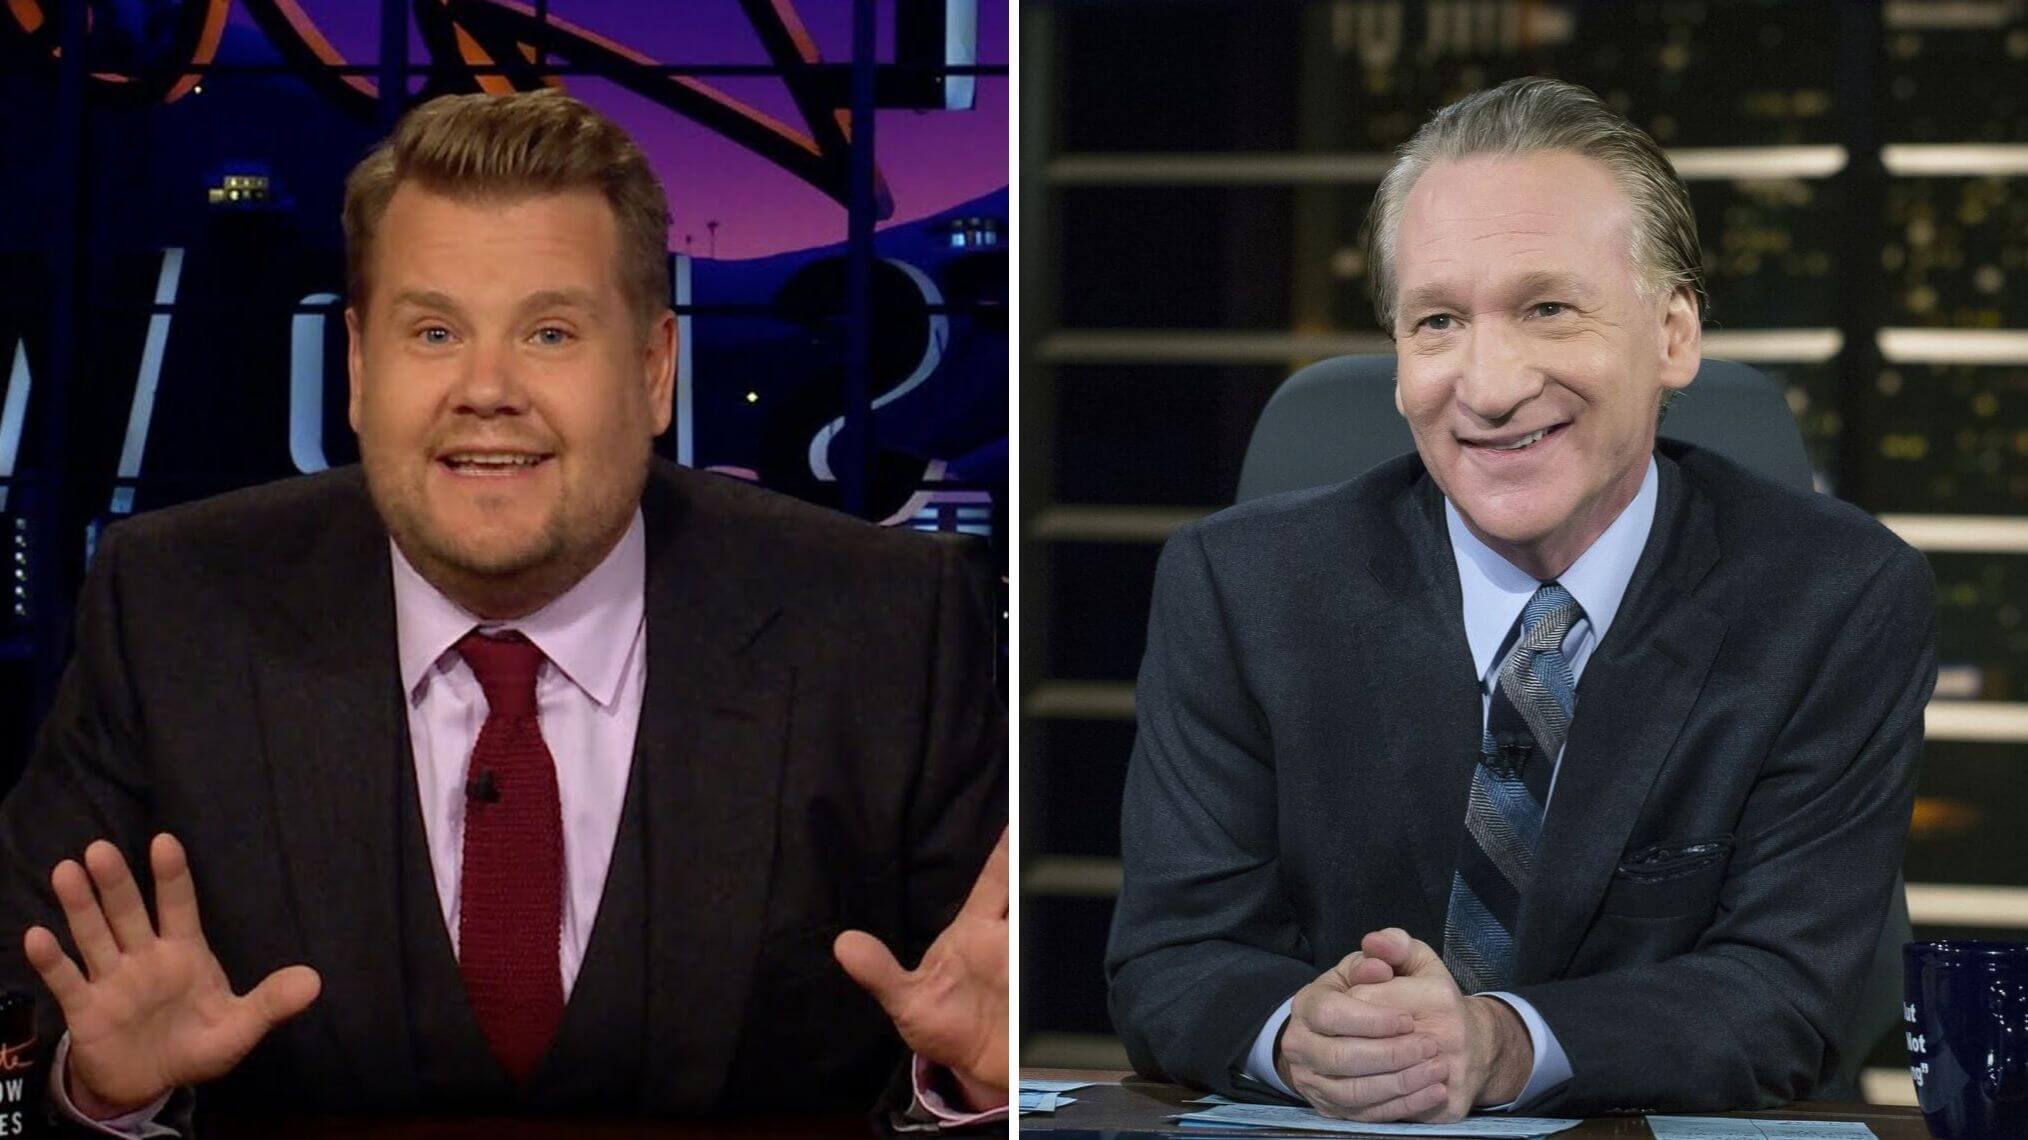 James Corden and Bill Maher